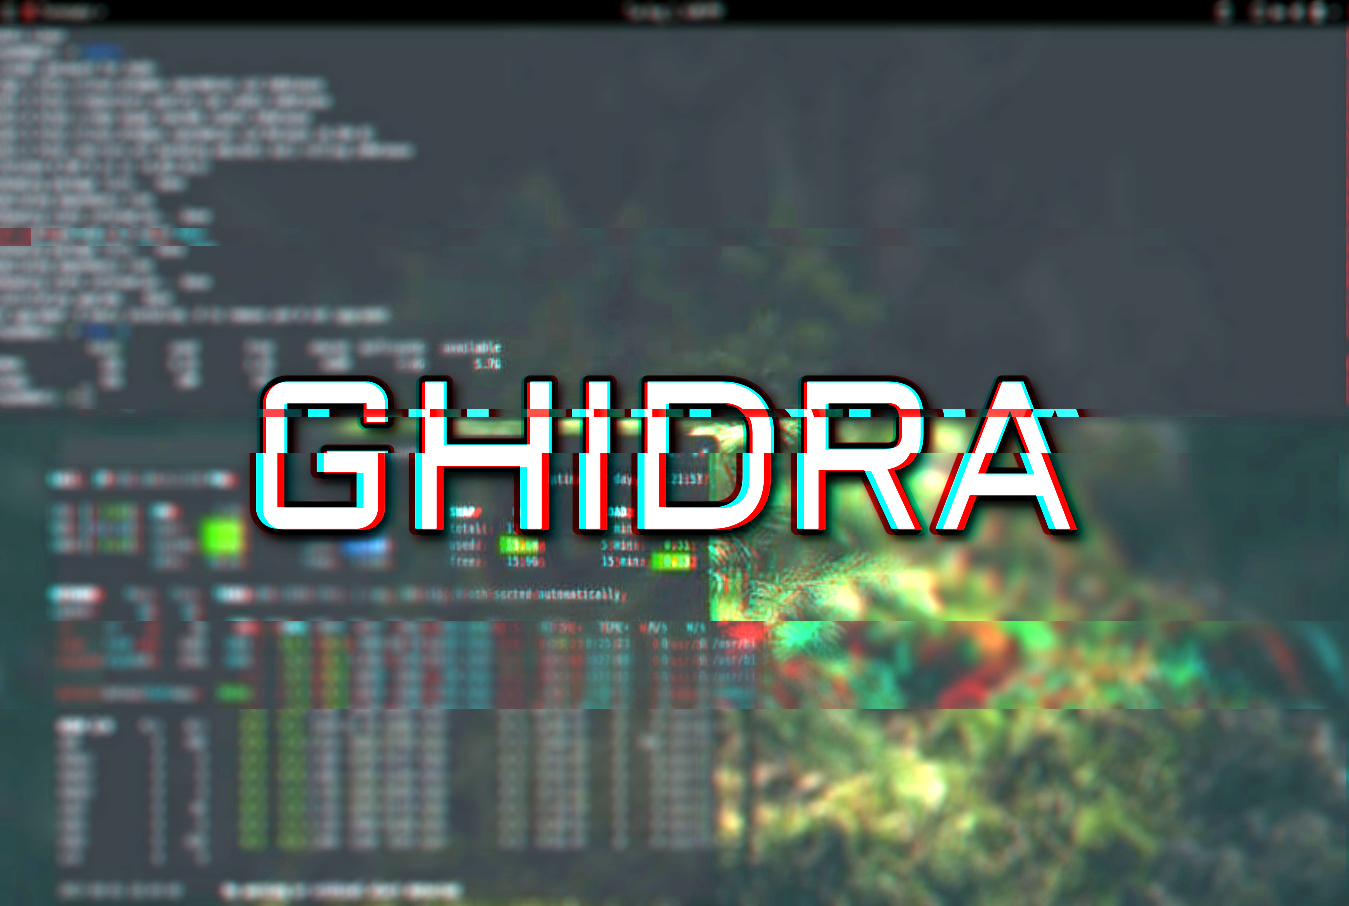 Flaw in NSA’s GHIDRA may lead to remote code execution attacks